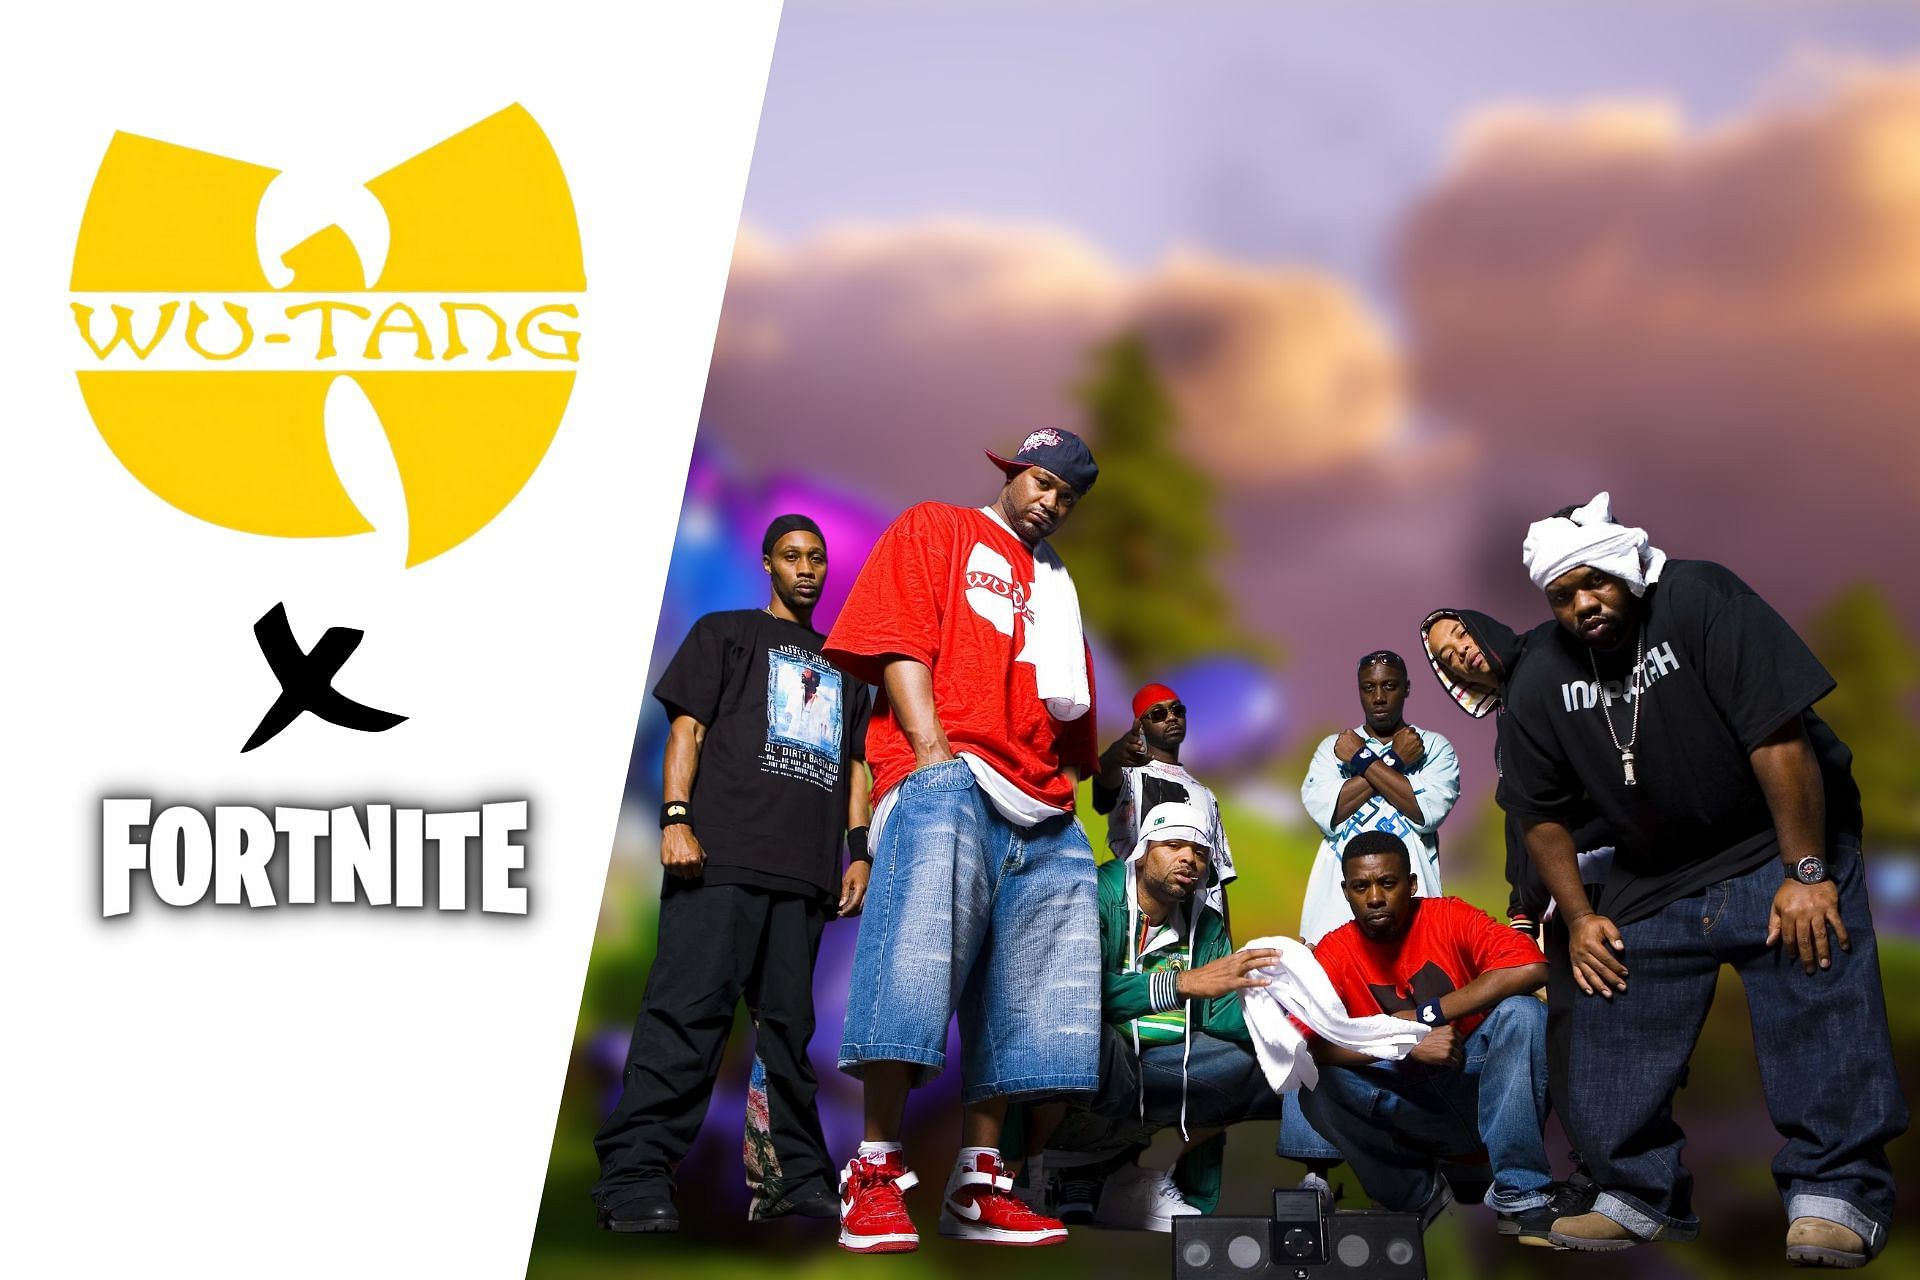 The Wu-Tang Clan crossover will take place on April 23 (Image via Sportskeeda)